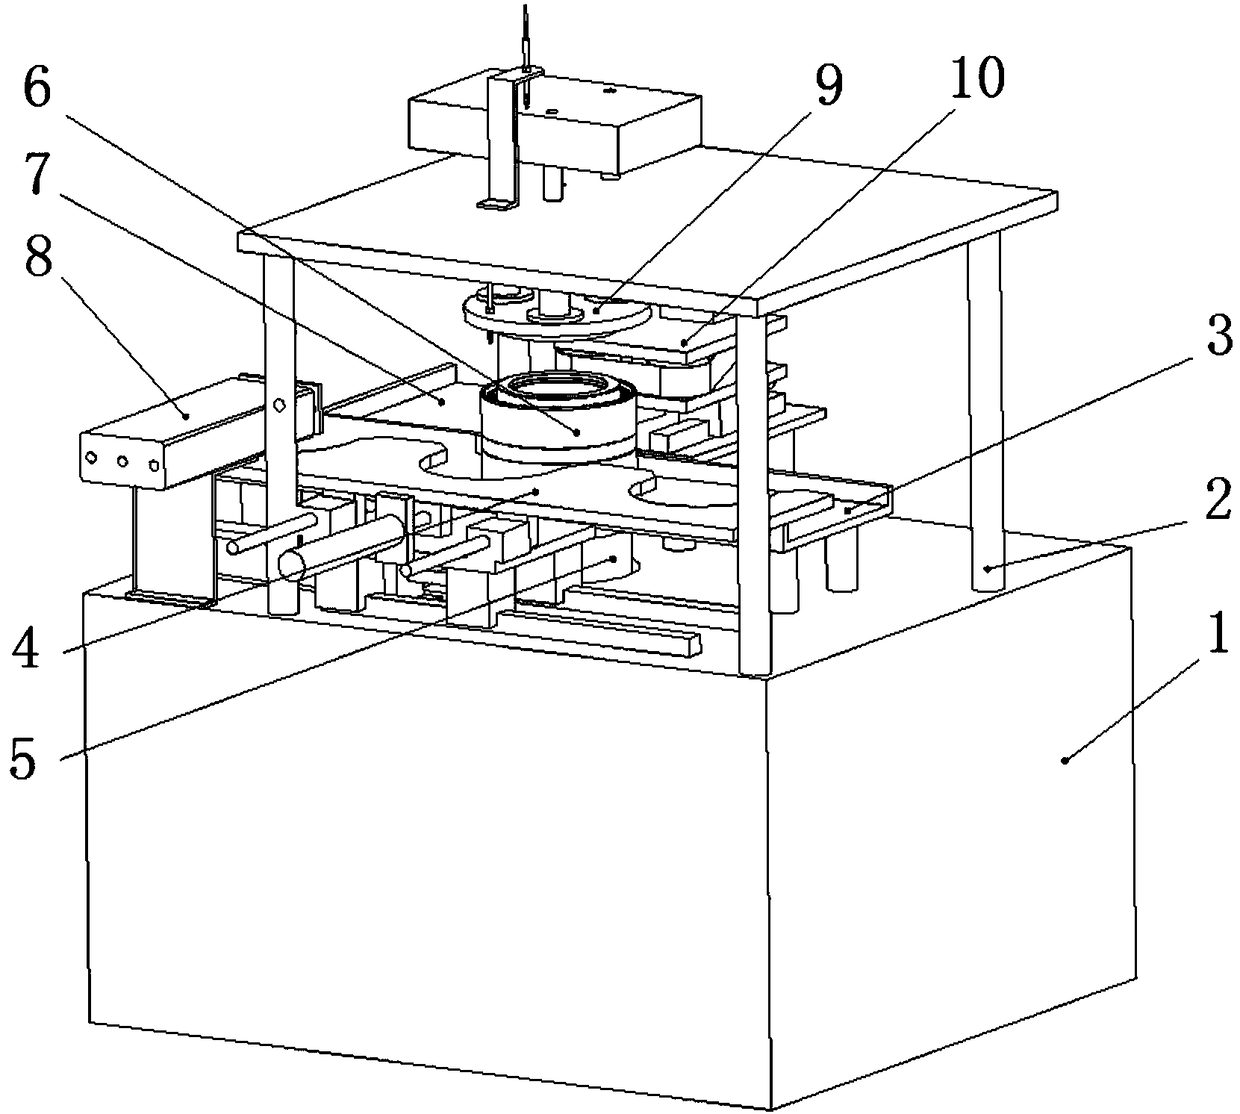 Automatic measuring device for axial clearance and assembly height of double-row bearings